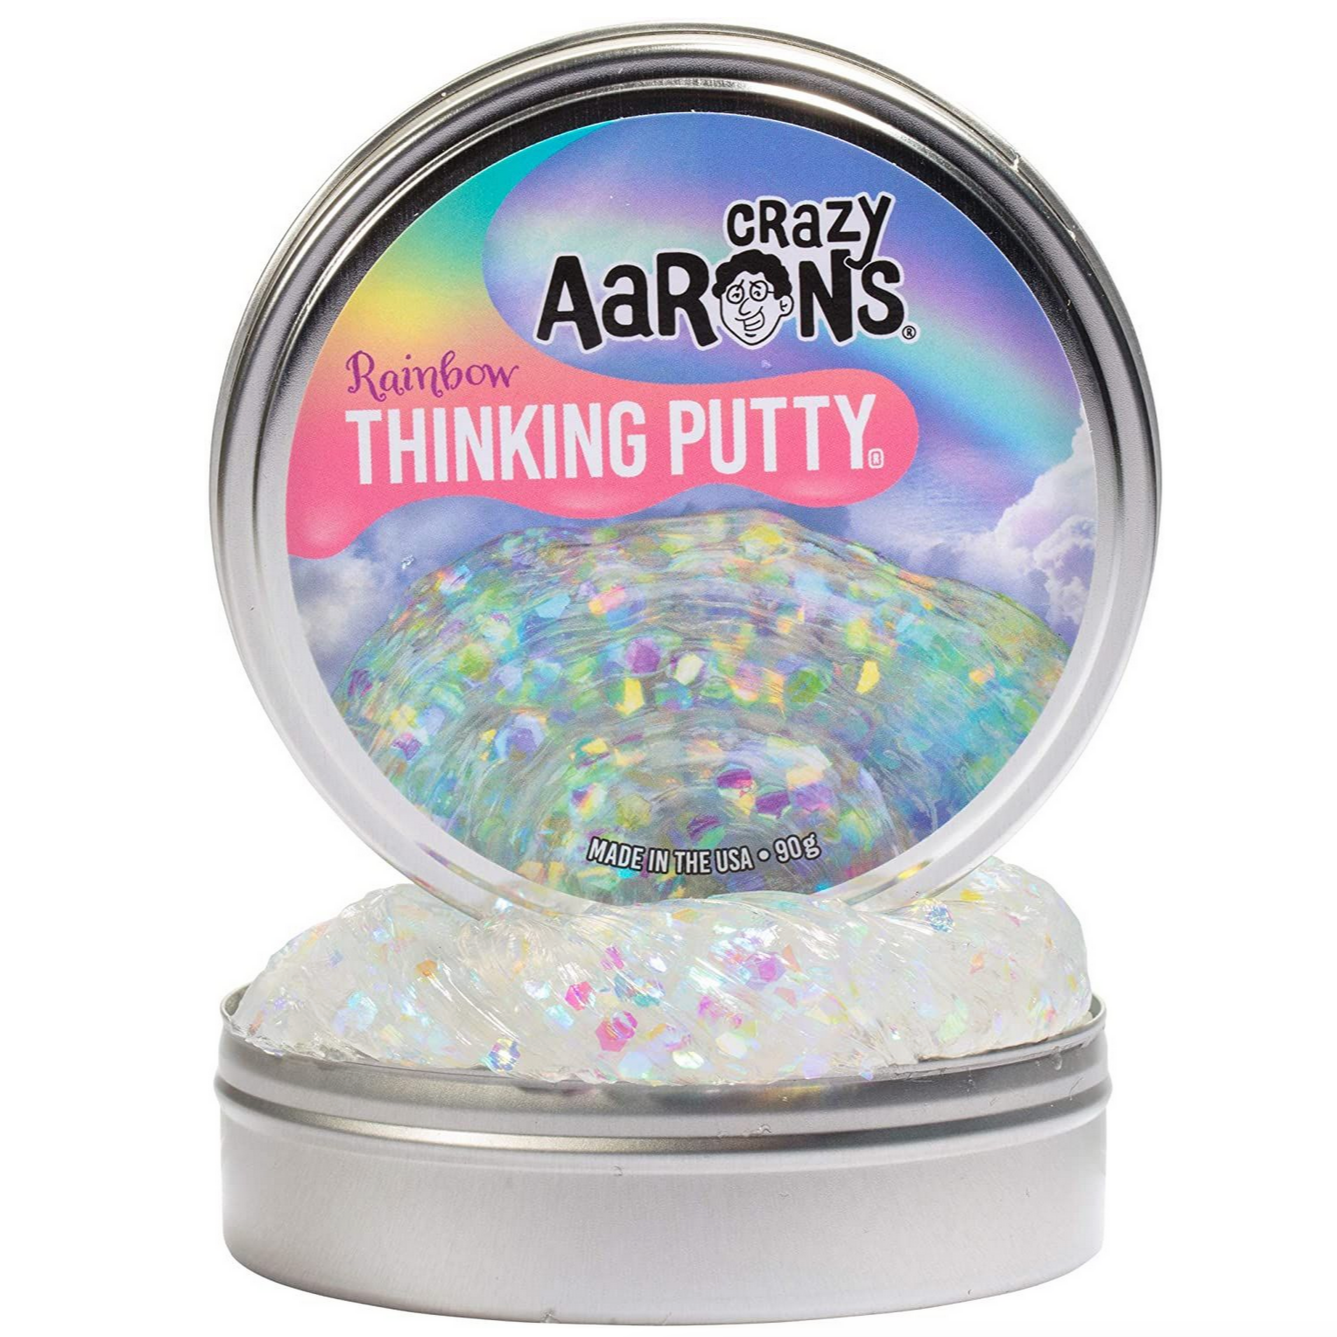 open putty tin with holographic clear putty inside